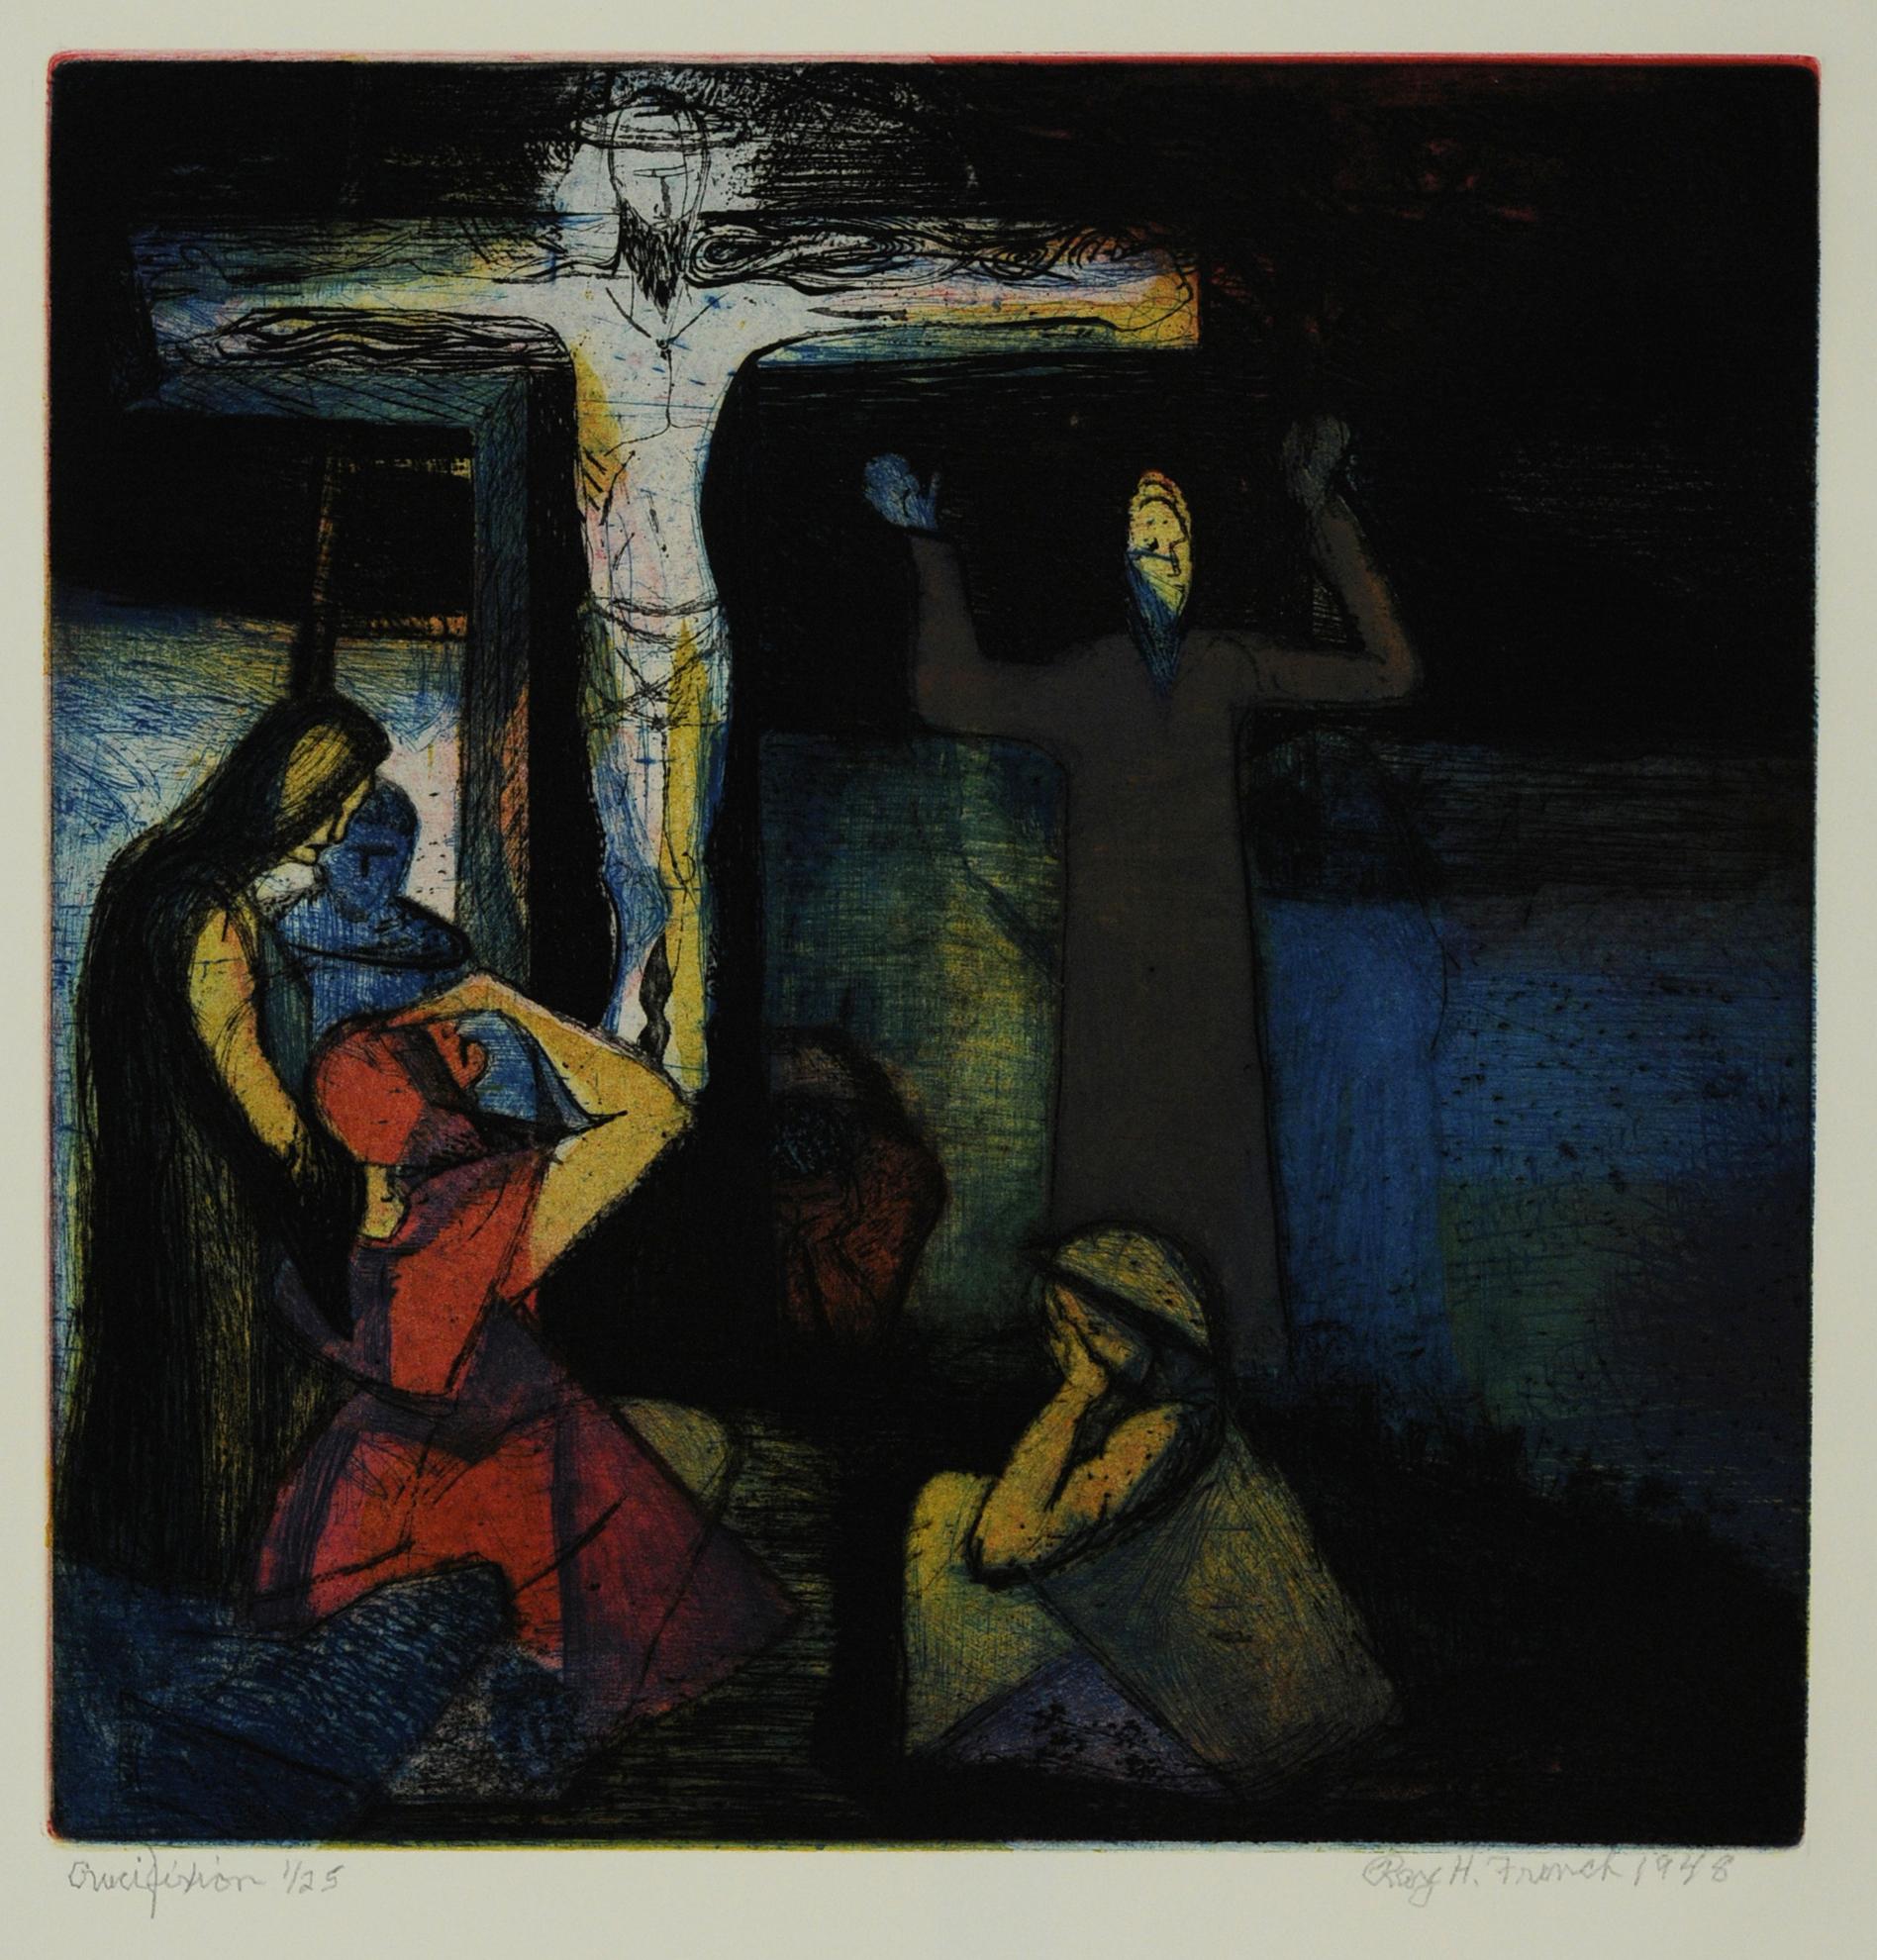 Crucifixion - Print by Ray H. French